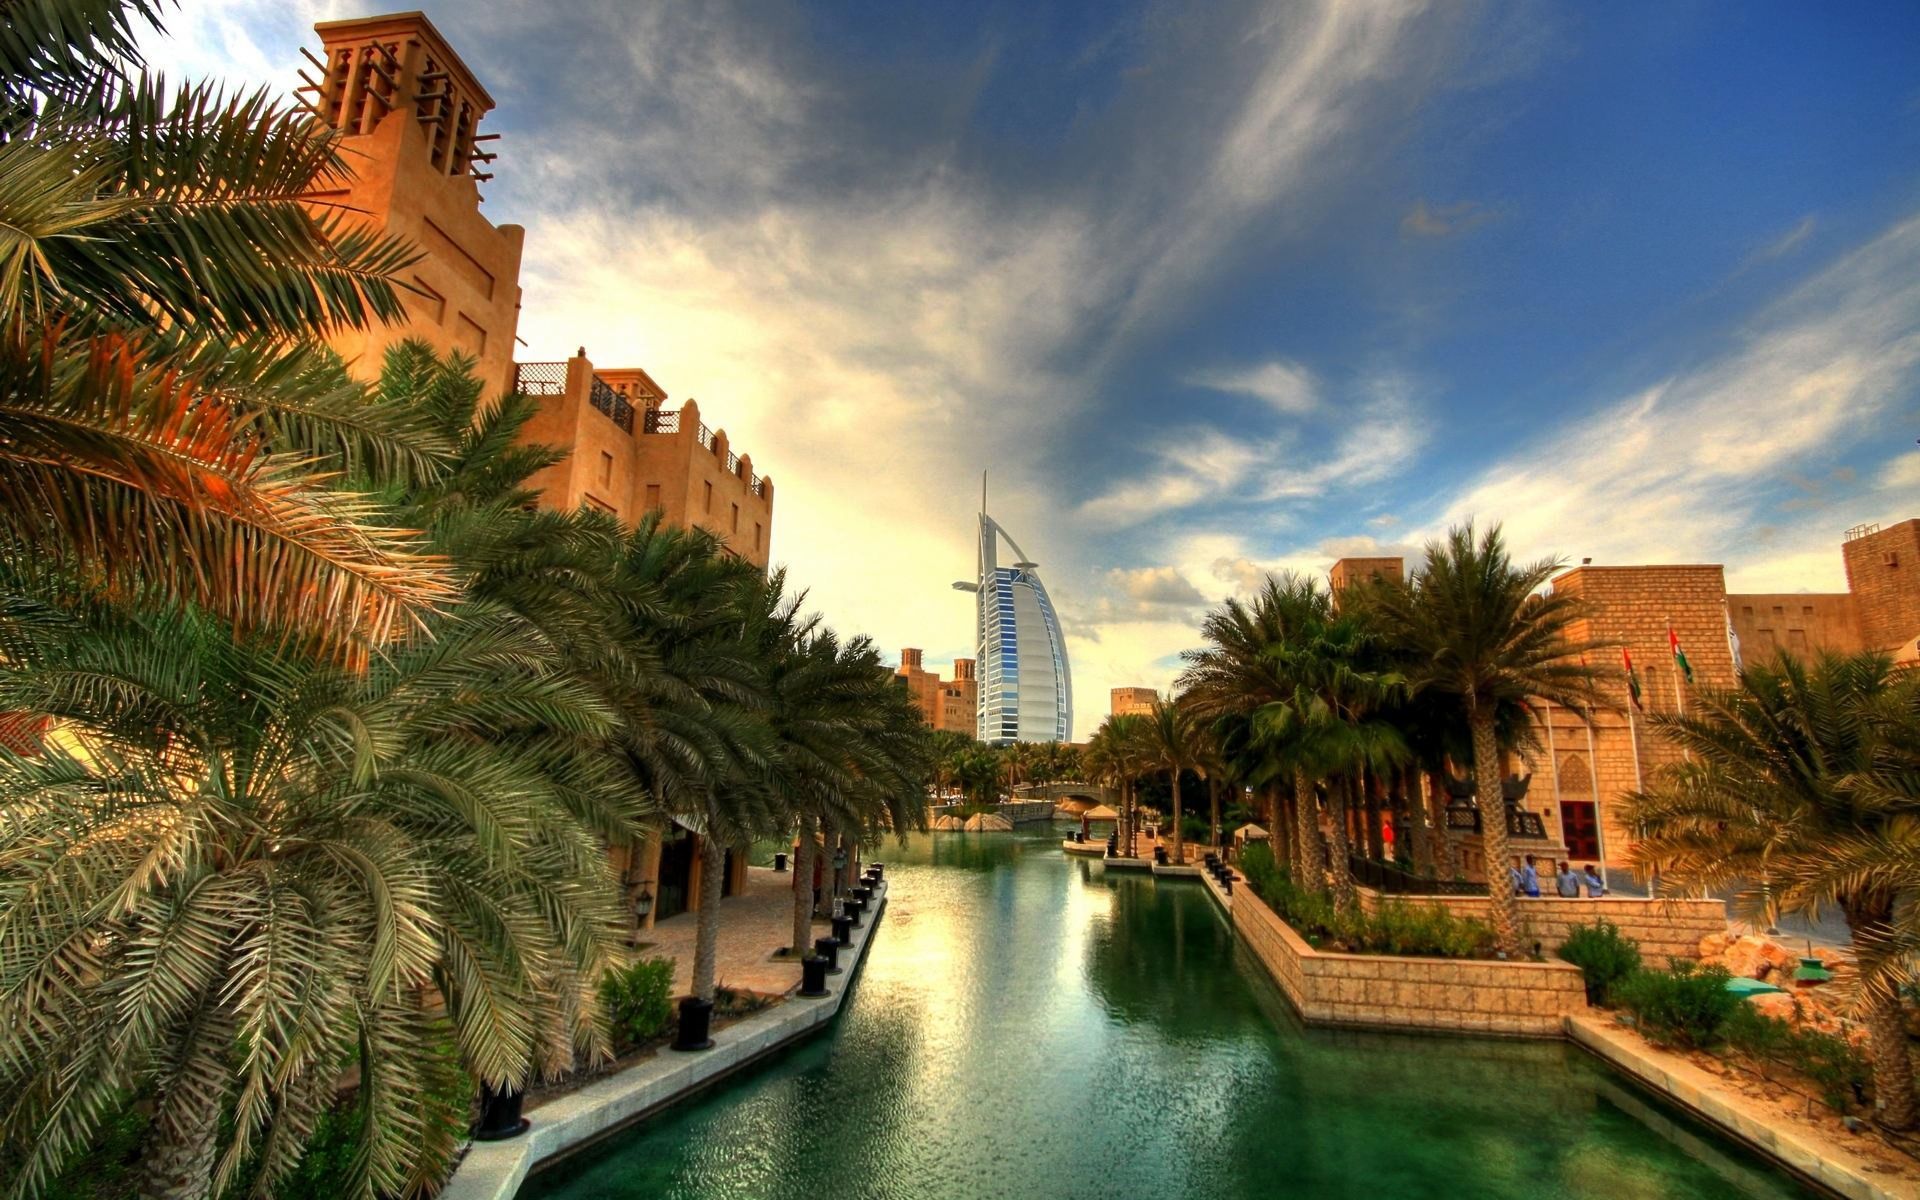 Mobile wallpaper: Dubai, Resort, Hotel, Man Made, Palm Tree, 867673  download the picture for free.